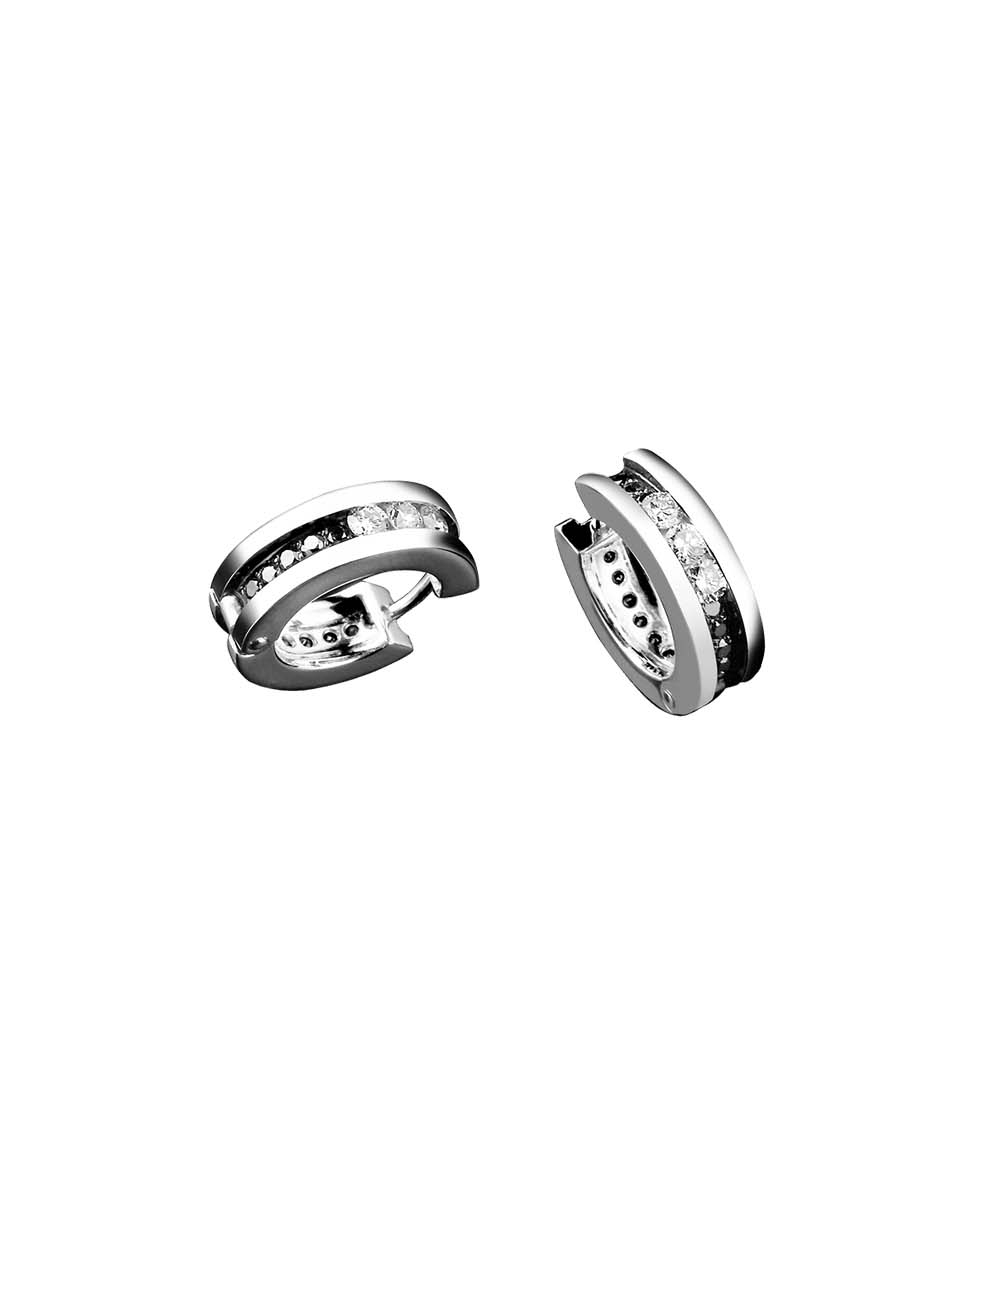 Trilogy hoop earrings, perfect blend of sophistication and modernity, in white gold and diamonds.